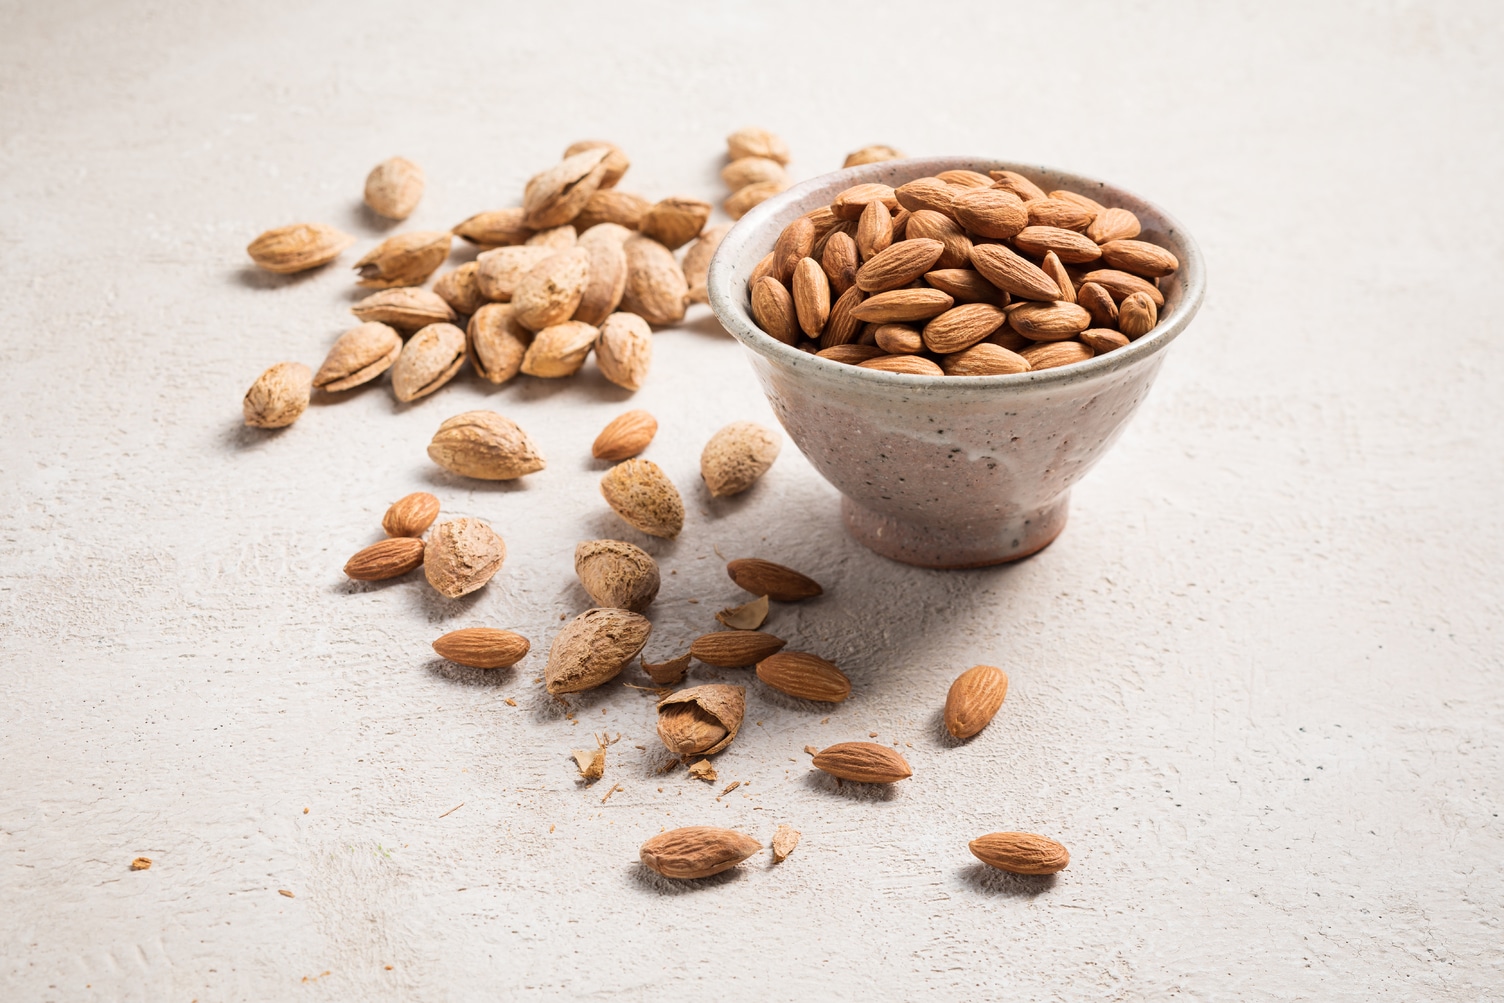 know-how-almonds-promote-muscle-recovery-and-reduce-fatigue-from-exercise-–-blog-–-healthifyme